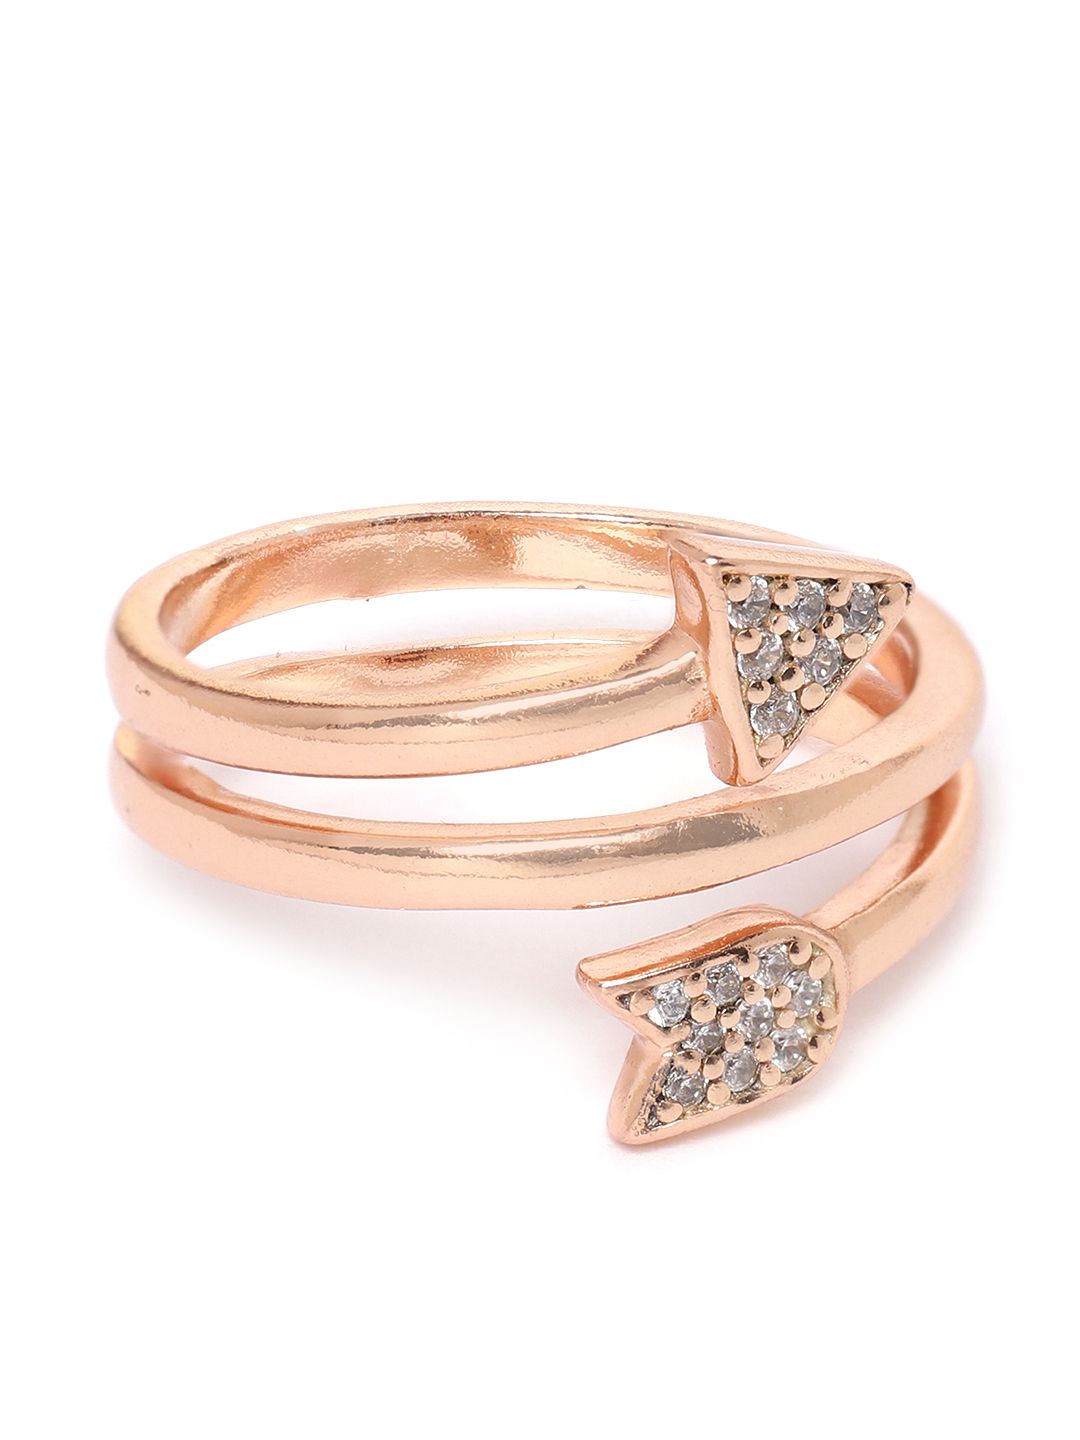 Carlton London Women Rose Gold-Plated CZ-Studded Adjustable Finger Ring Price in India